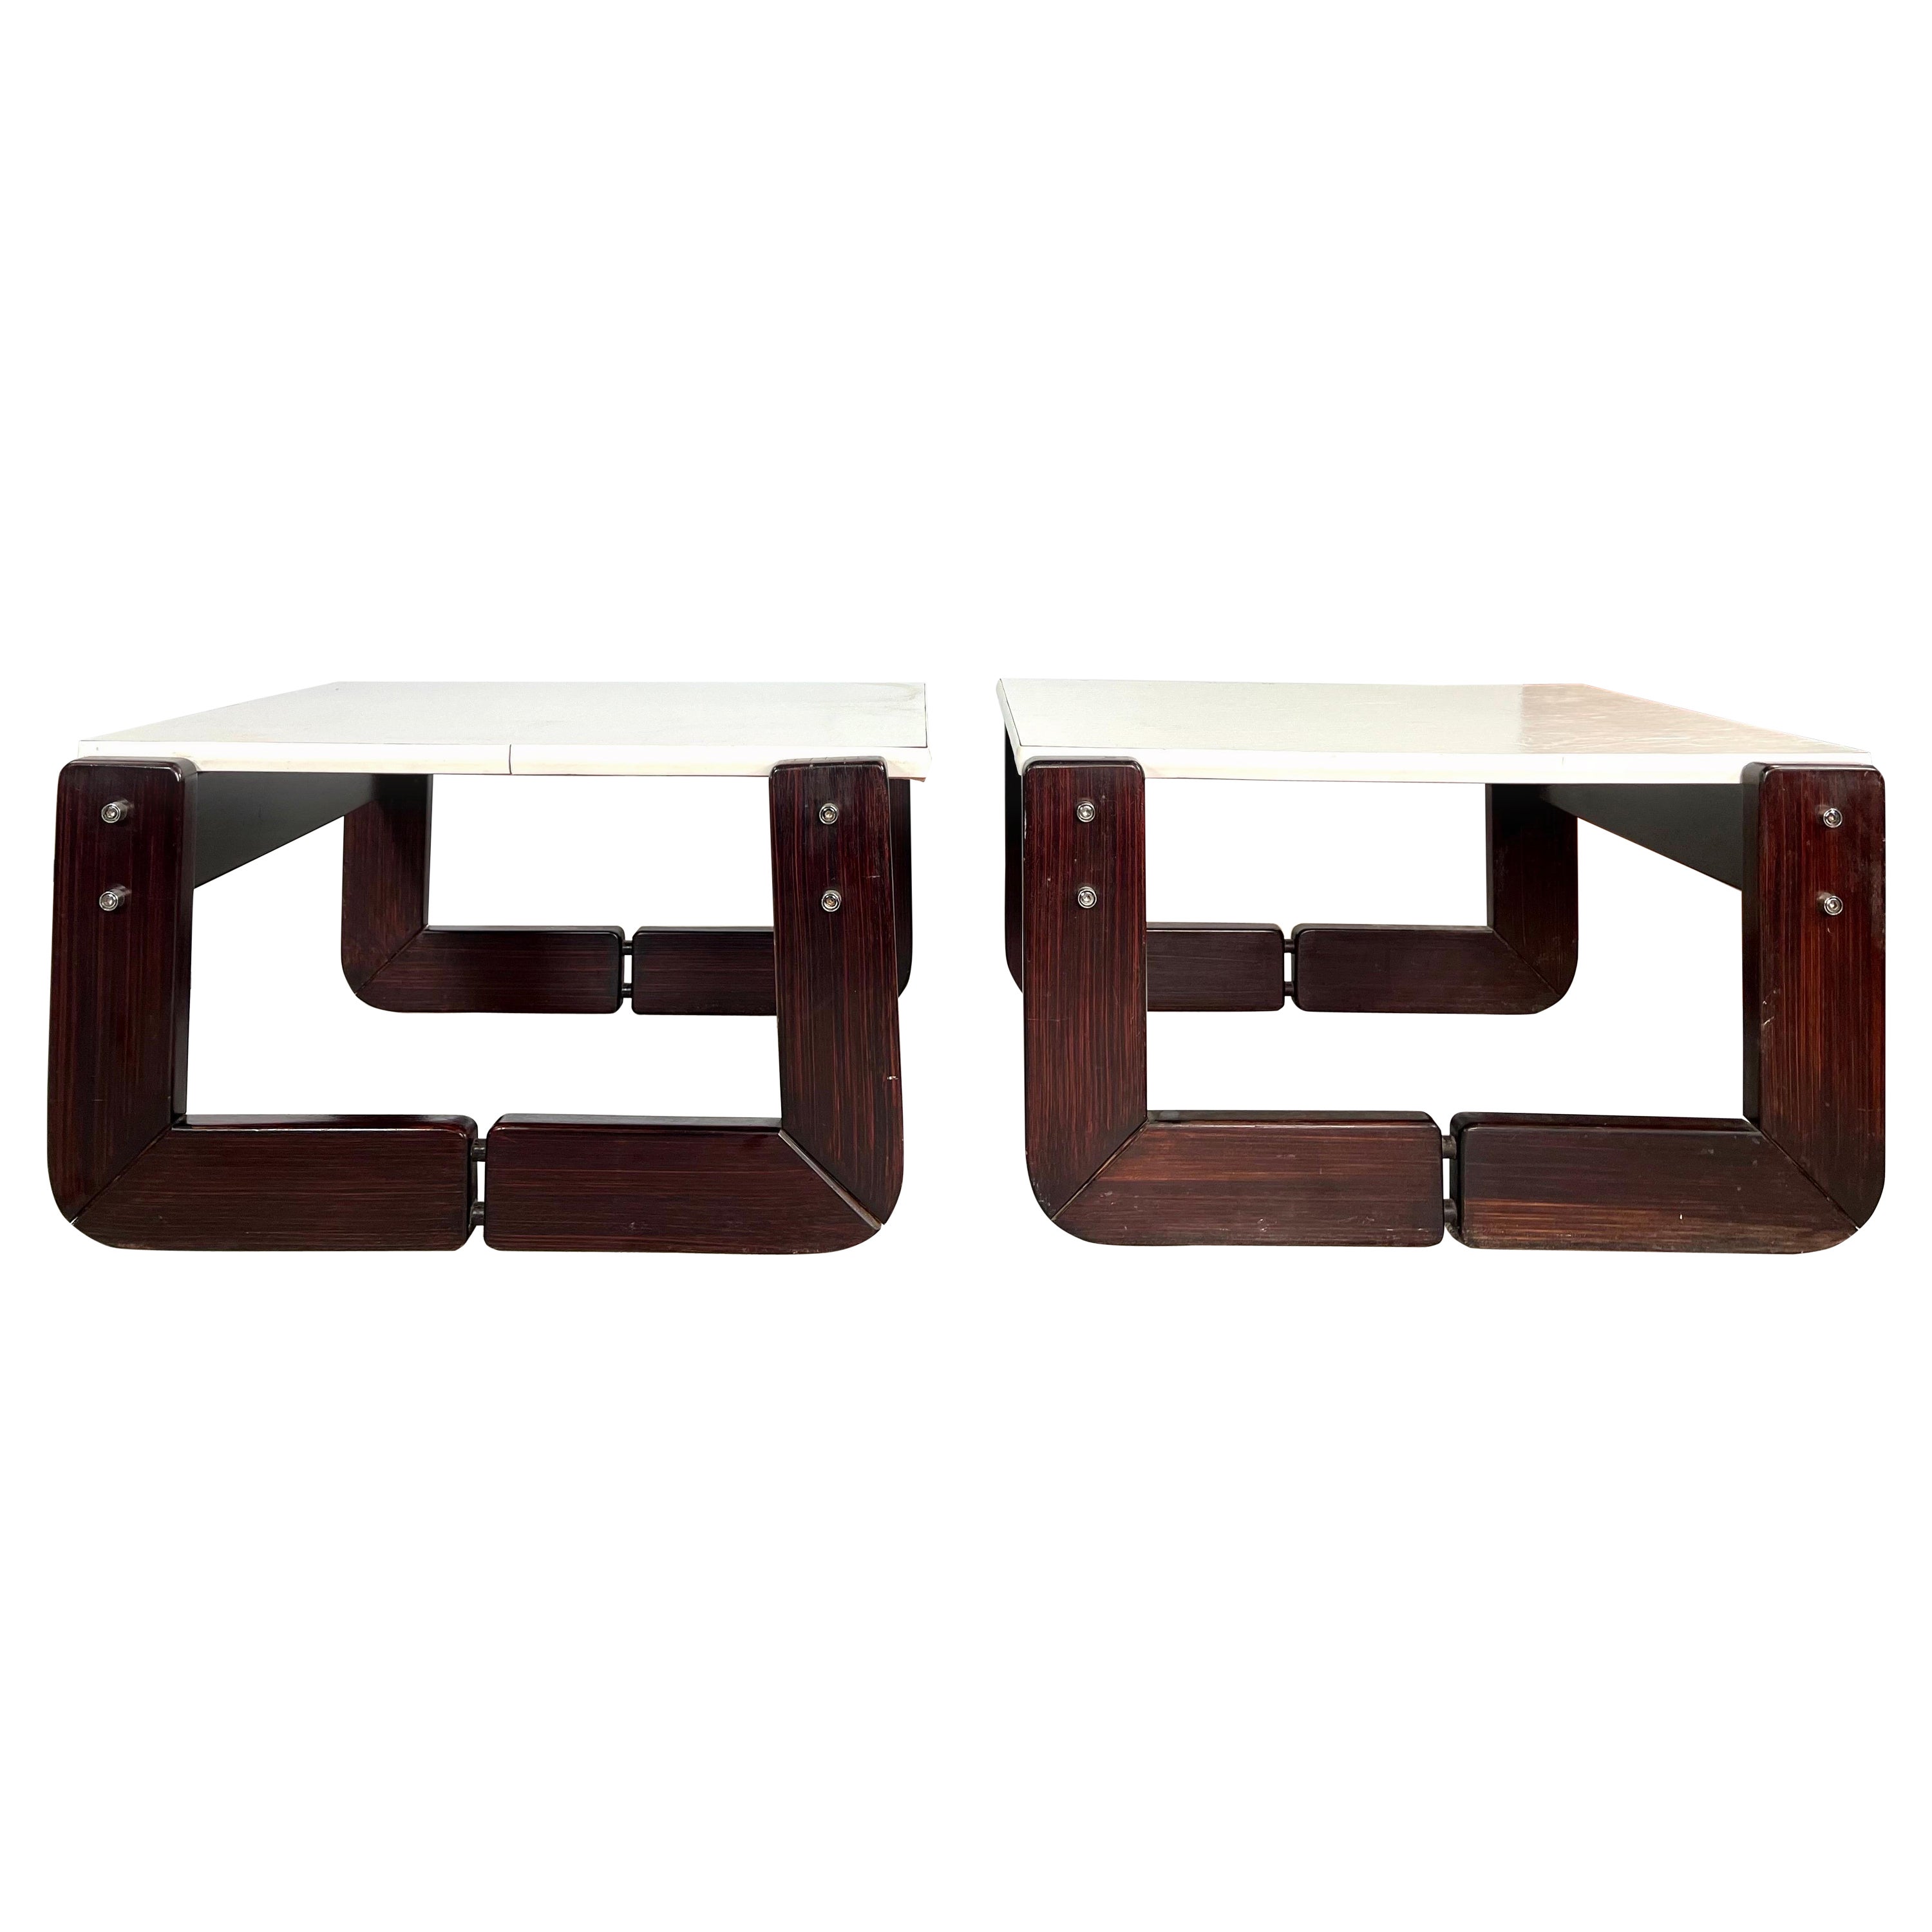 Rosewood and Laminate Top Side Tables by Percival Lafer, a Pair For Sale